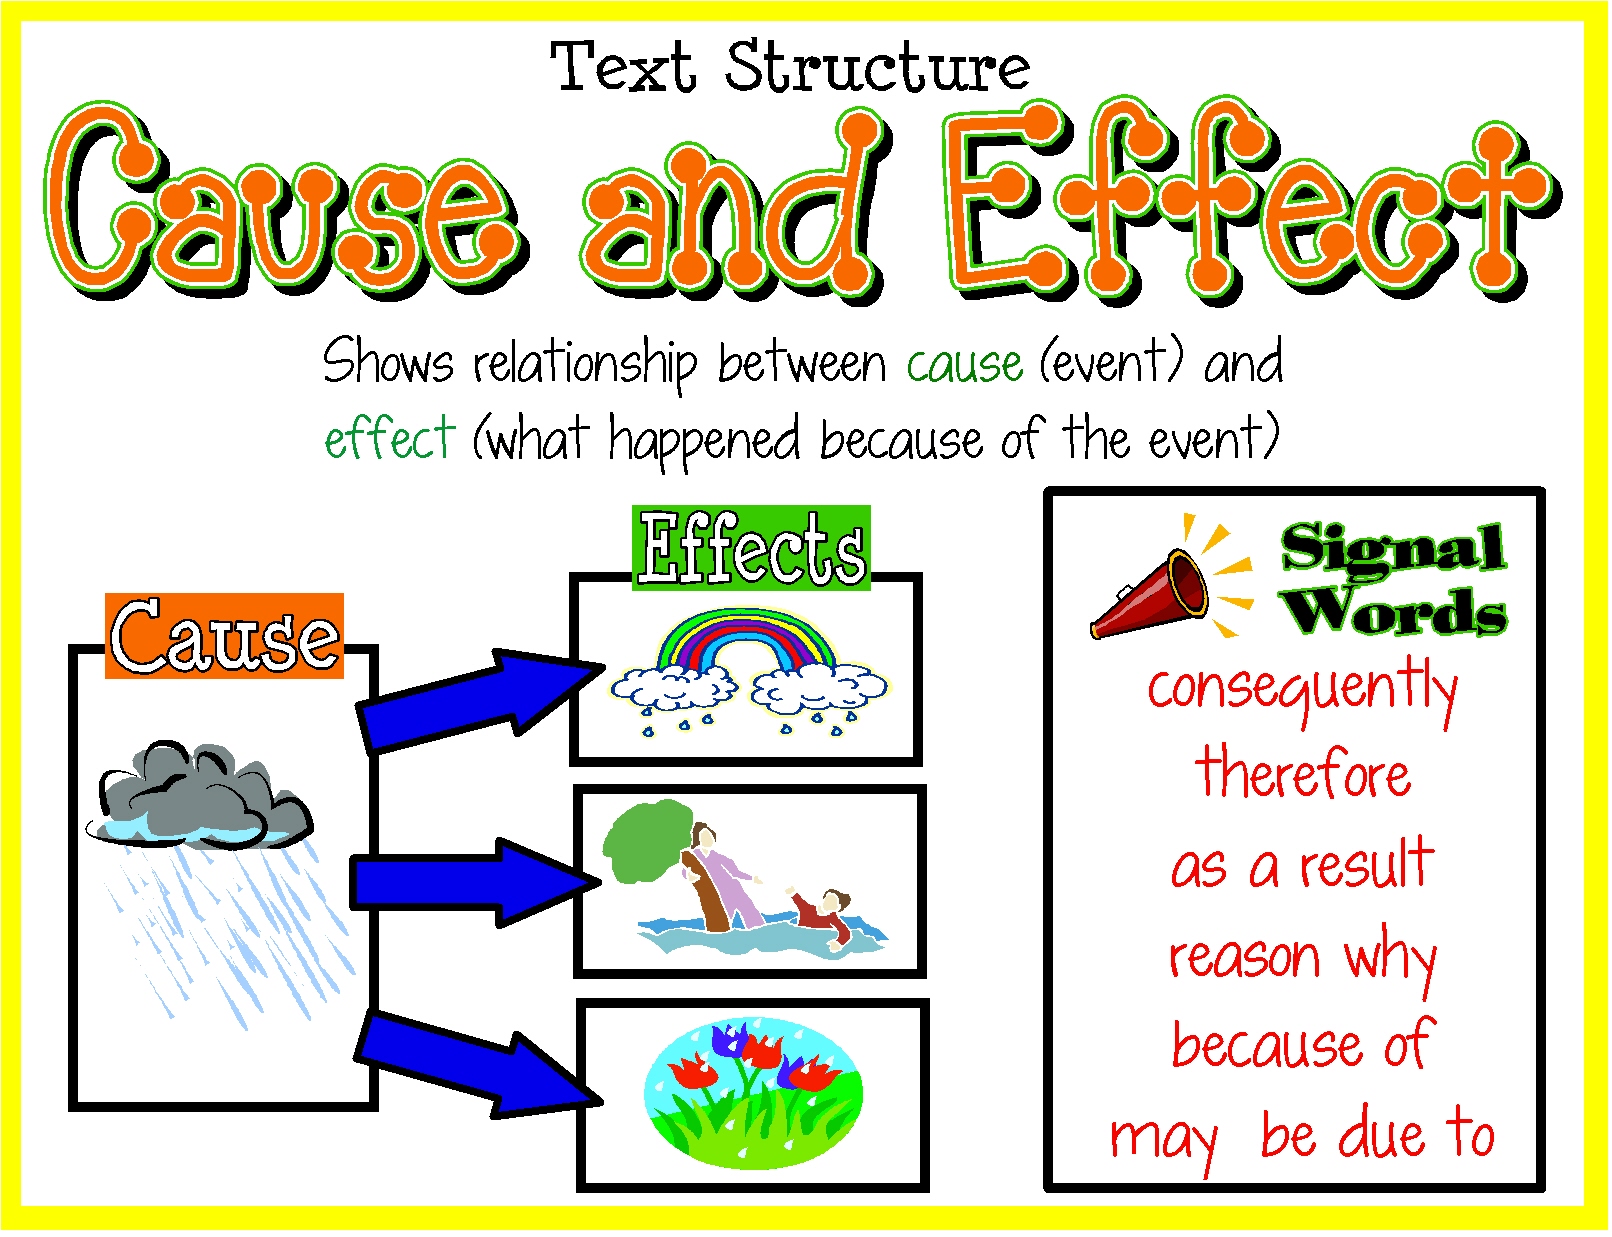 what does cause and effect mean in text structure